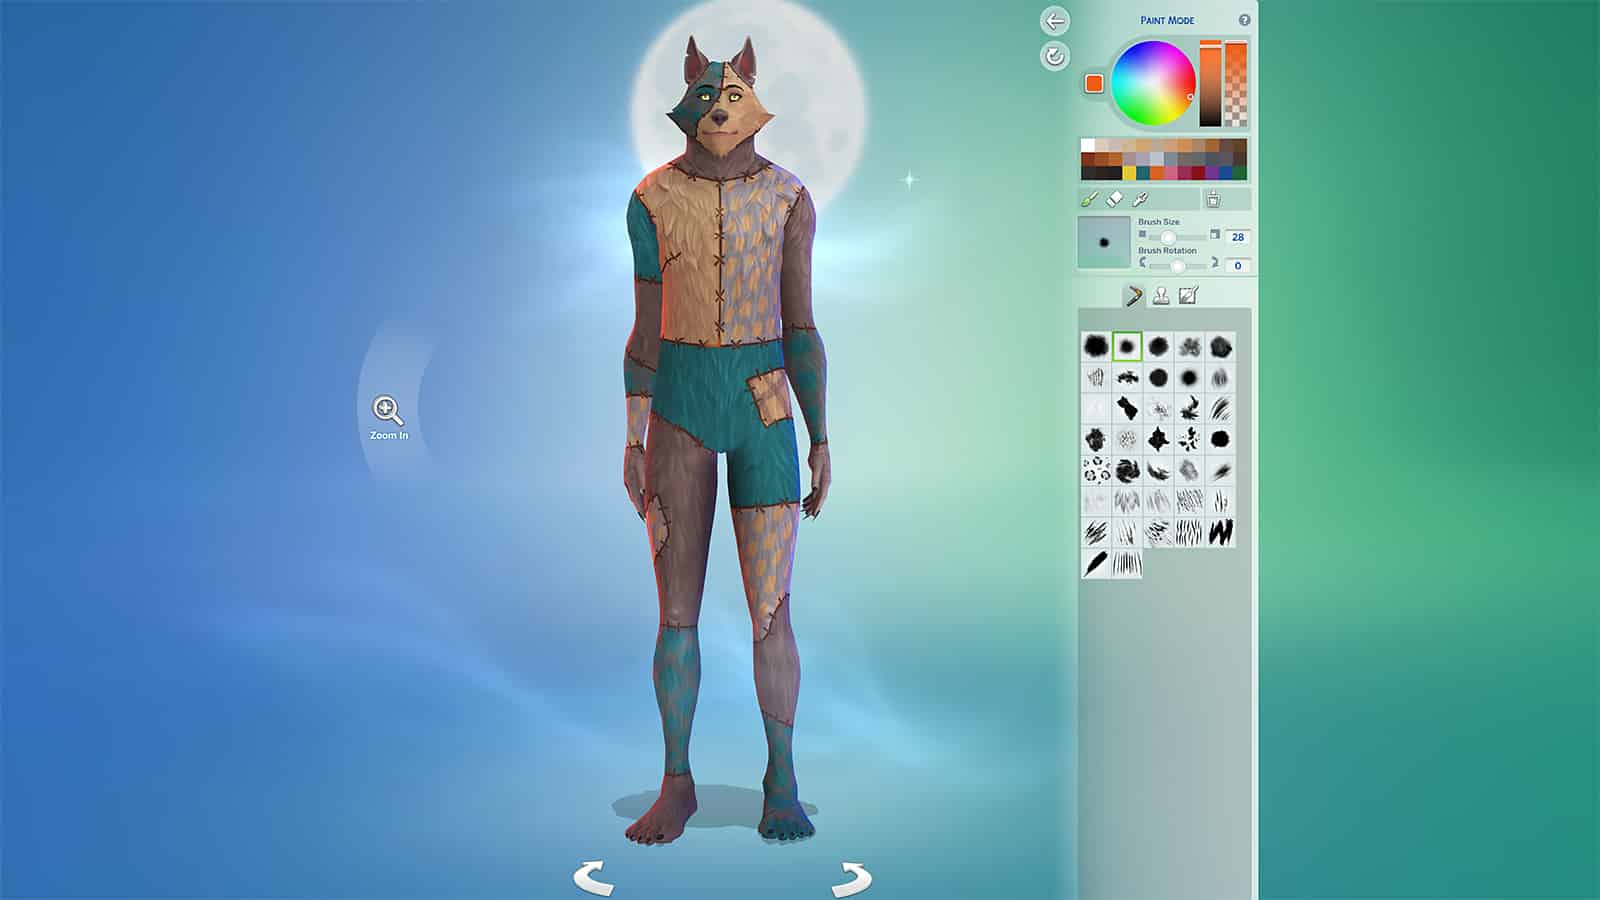 Stencils for Werewolves in The Sims 4 in CAS